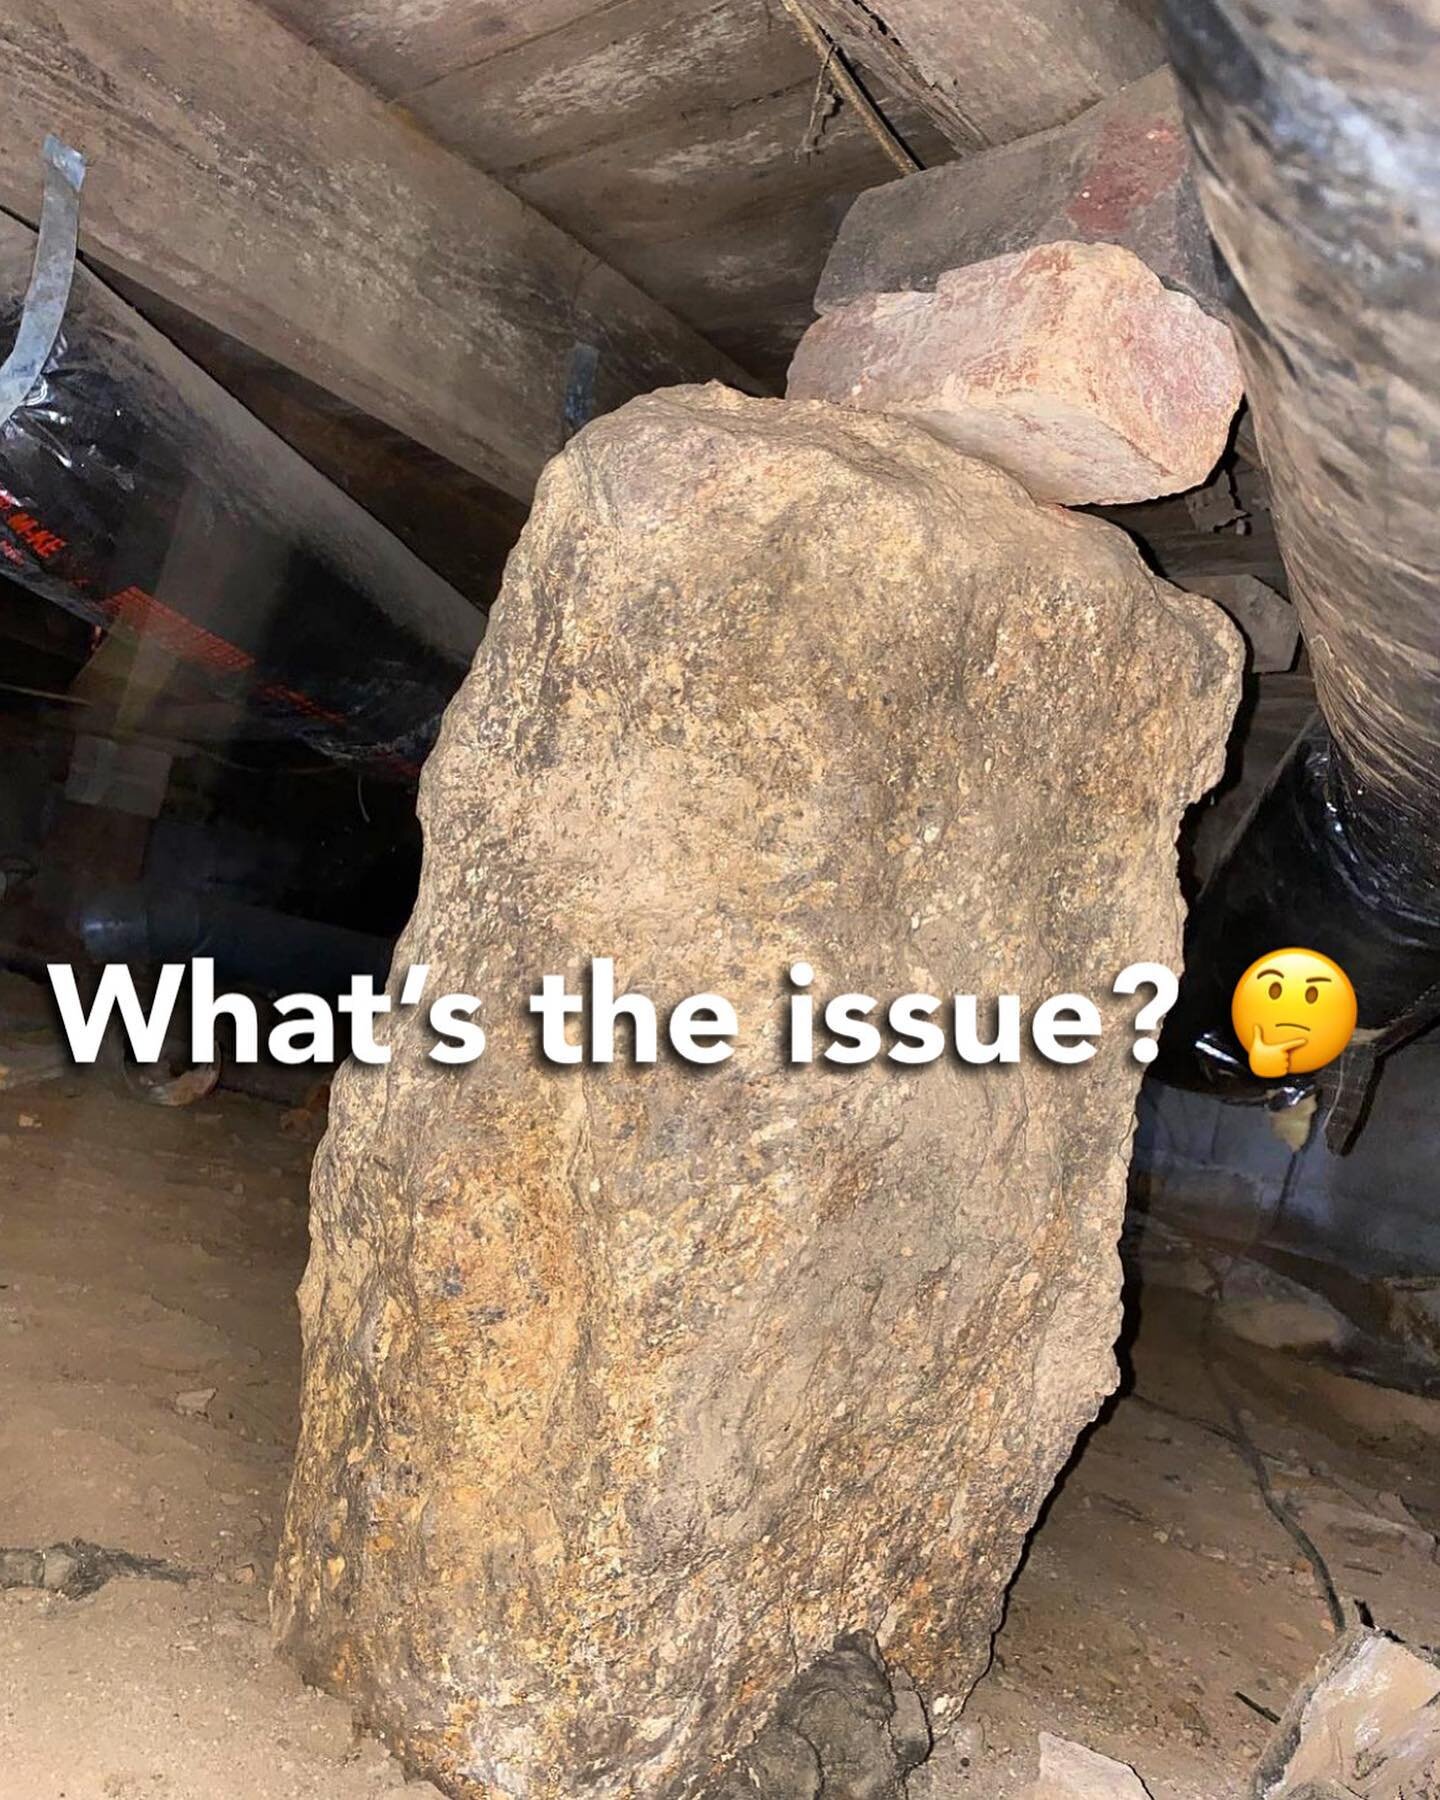 When your home inspector doesn&rsquo;t care how small the crawl space is&hellip;

This part of the home was built in the 1950s and it was hard to reach because of the additions done to the home that extended out past the existing foundation.

#picori